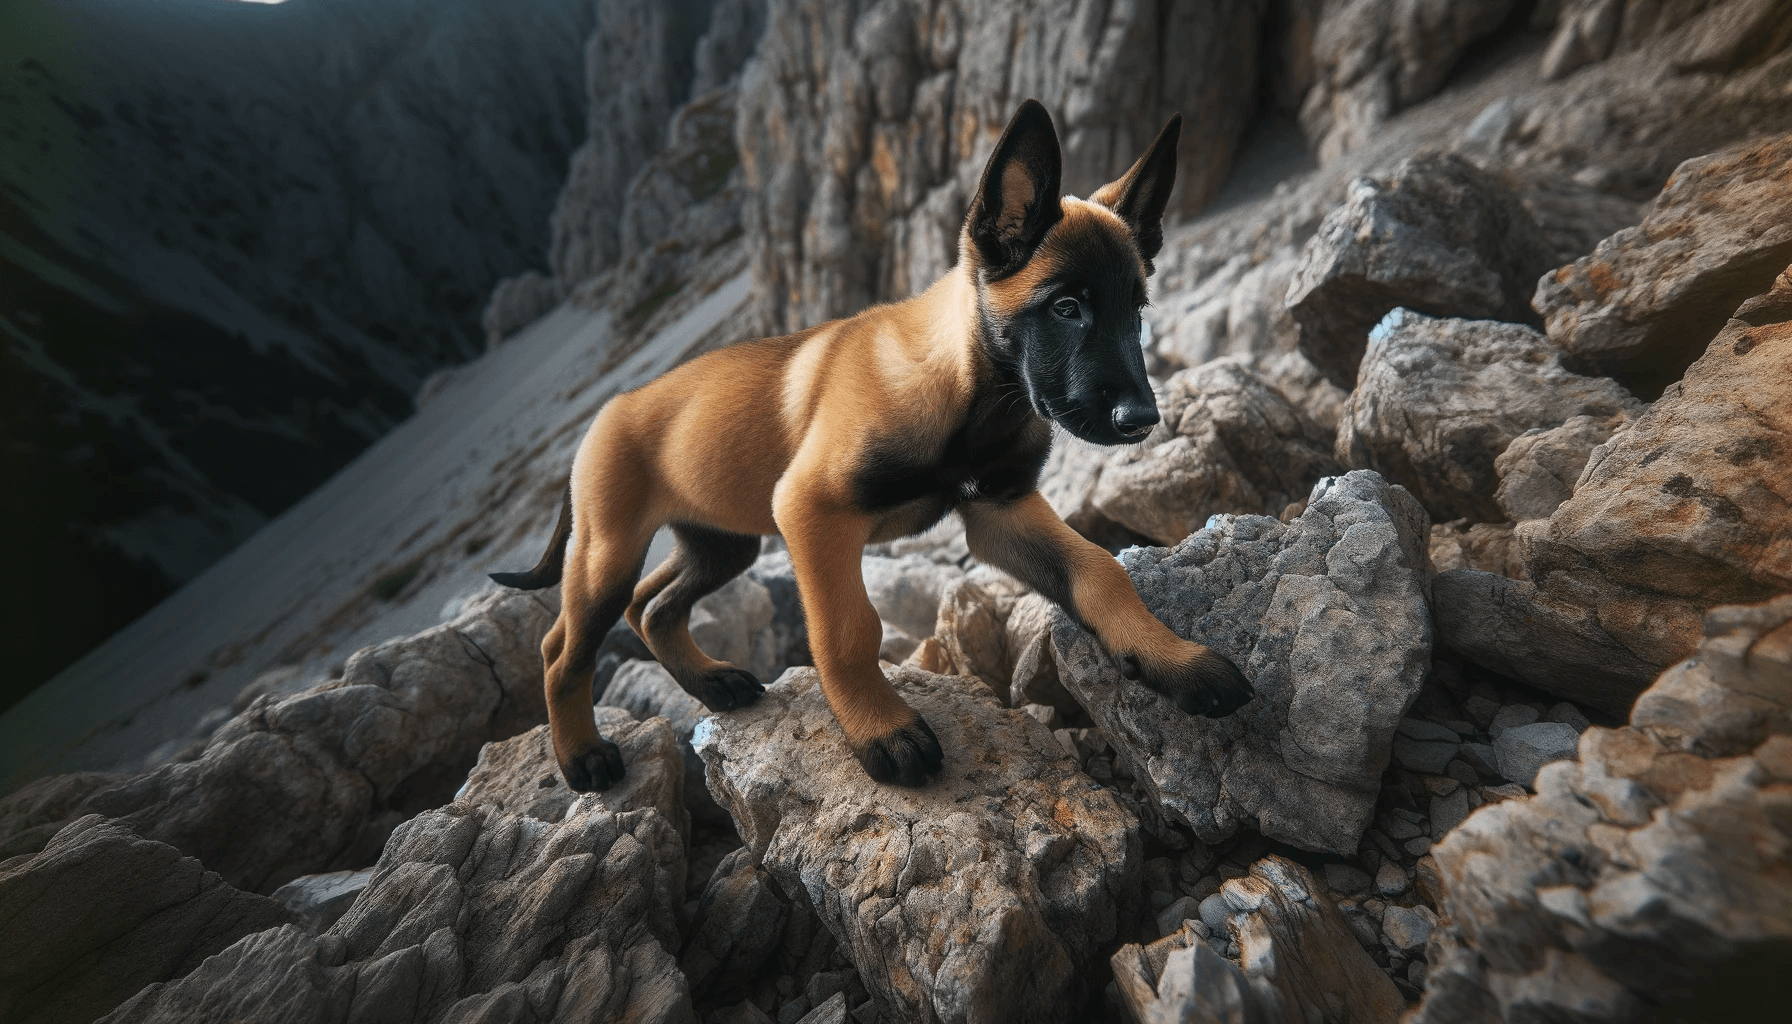 Rare Black Belgian Malinois puppy exploring rocky terrain, indicative of the breed's versatility, with a blend of black and fawn colors.